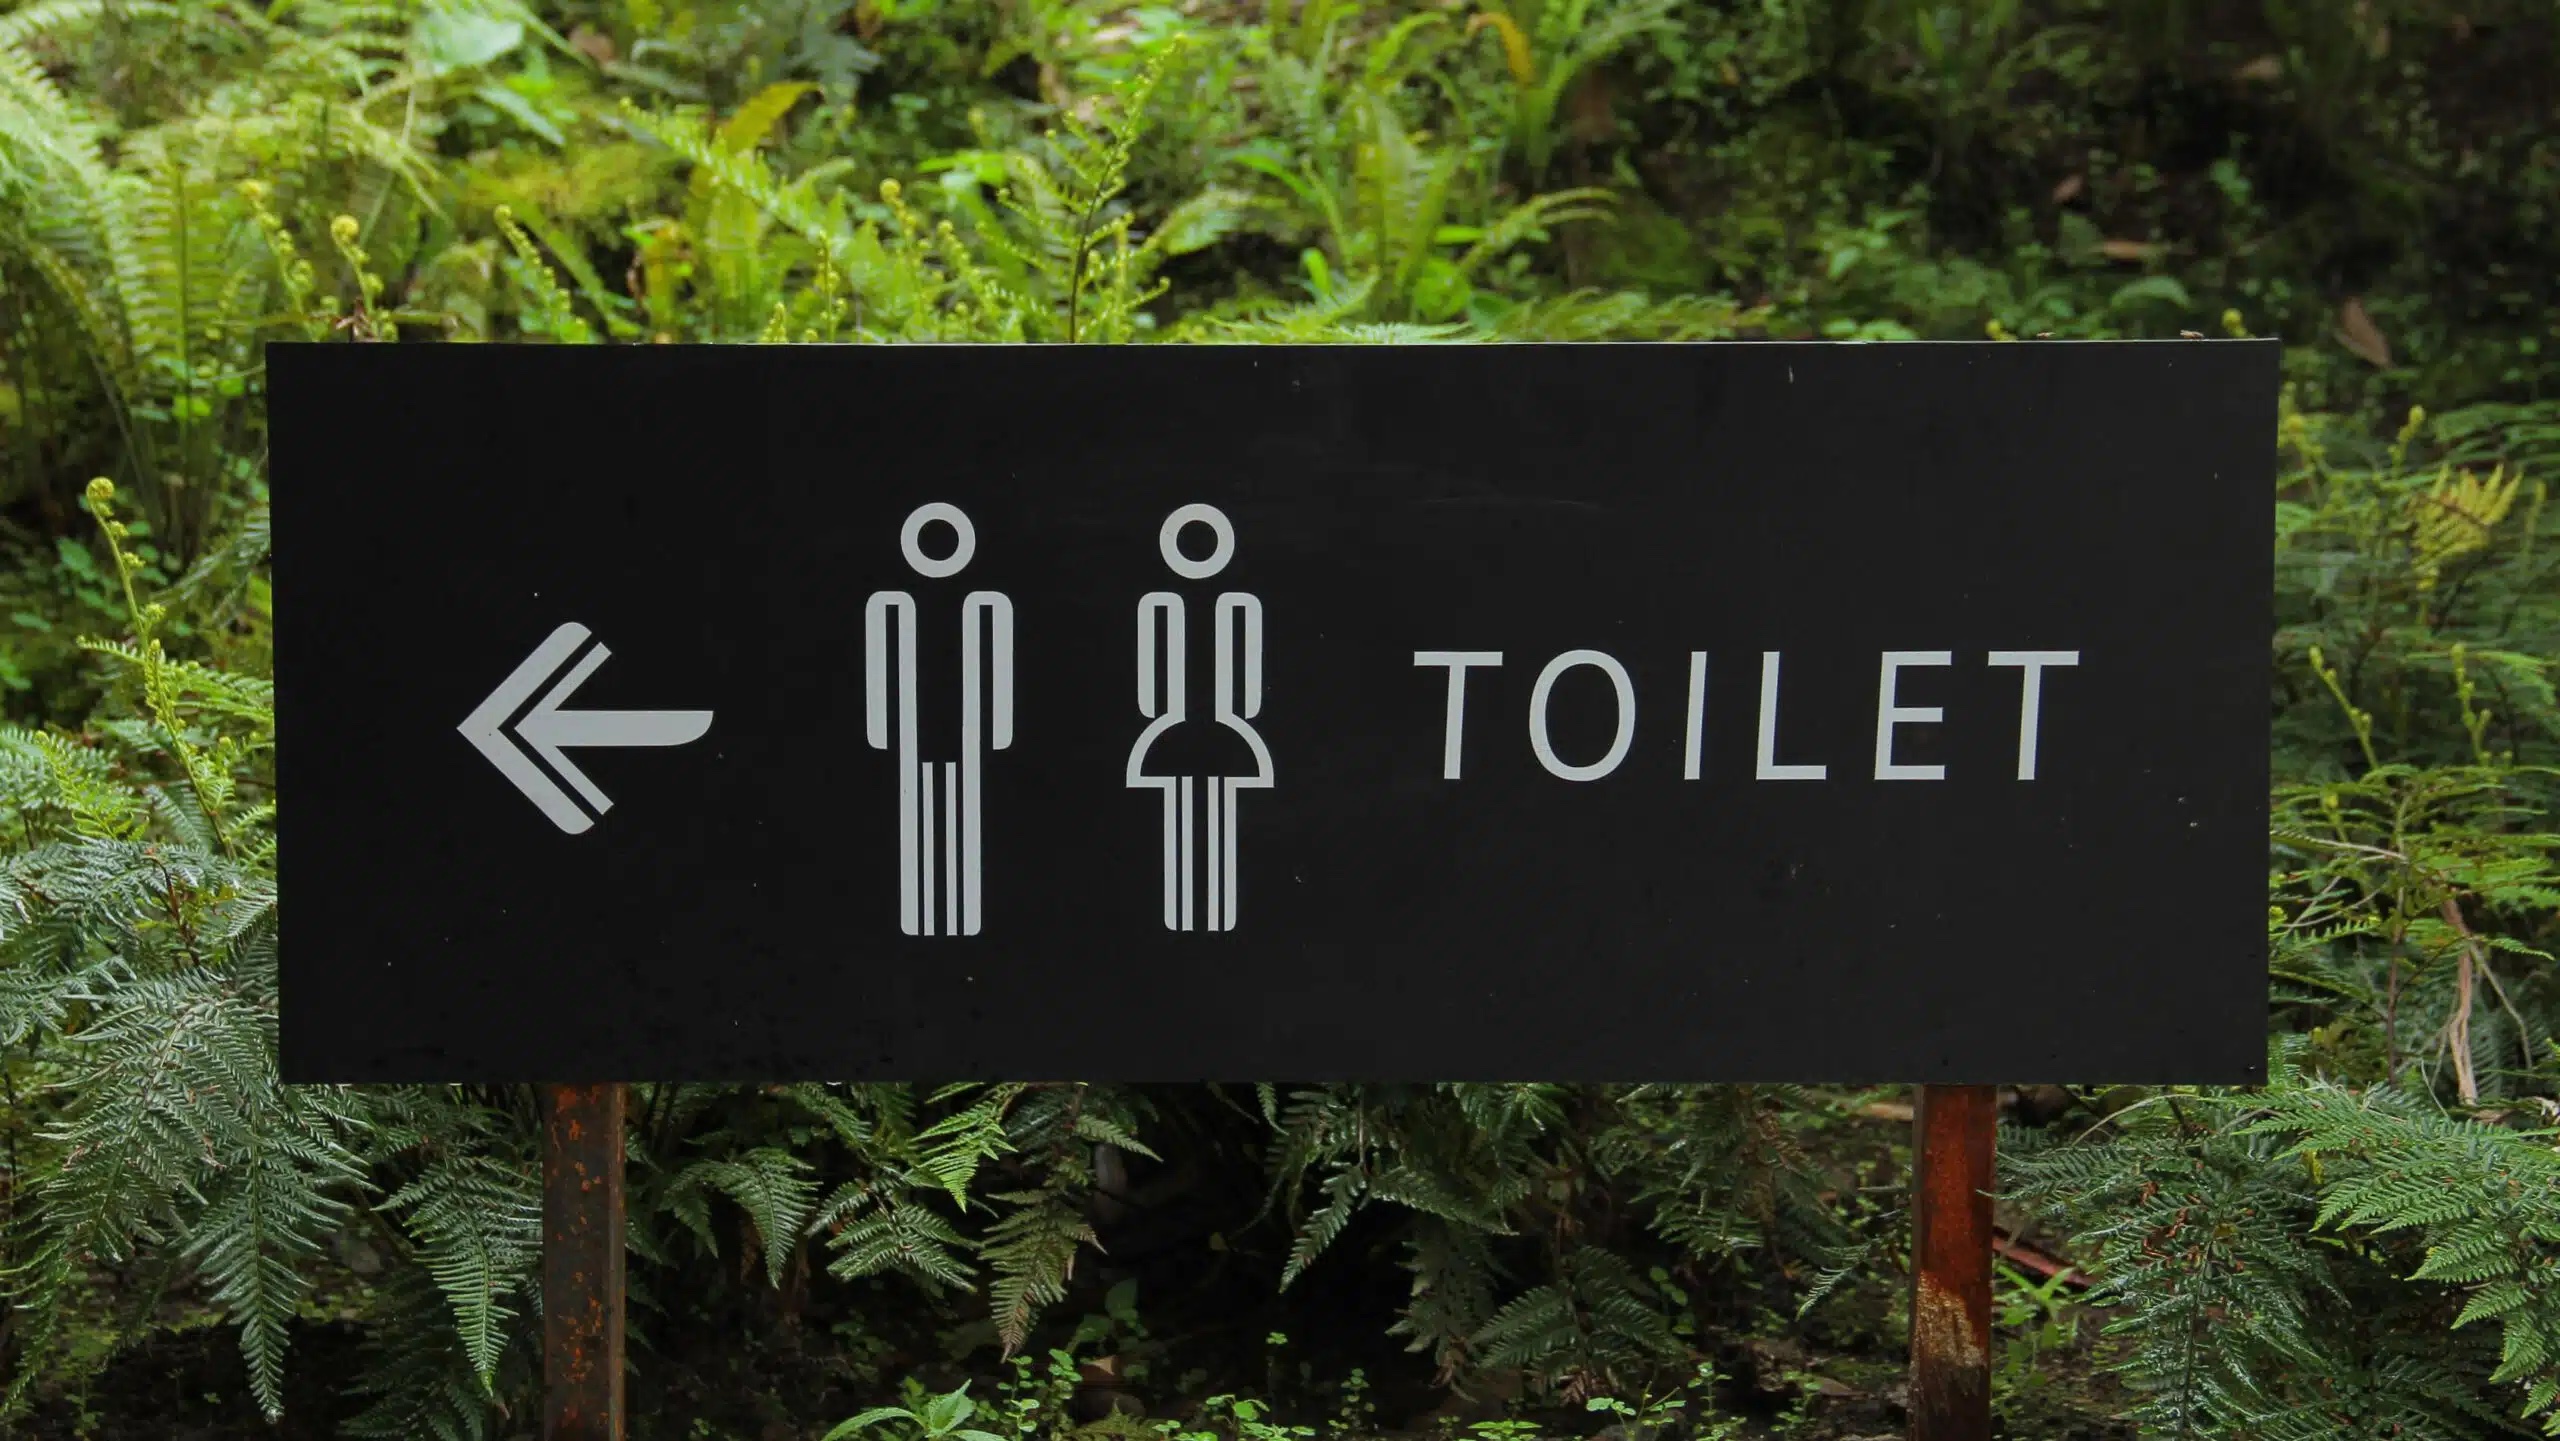 Male and female figures in white outlinet with white text showing Toilet and and a white arrow pointing left on a black background. Green foliage is in the background.